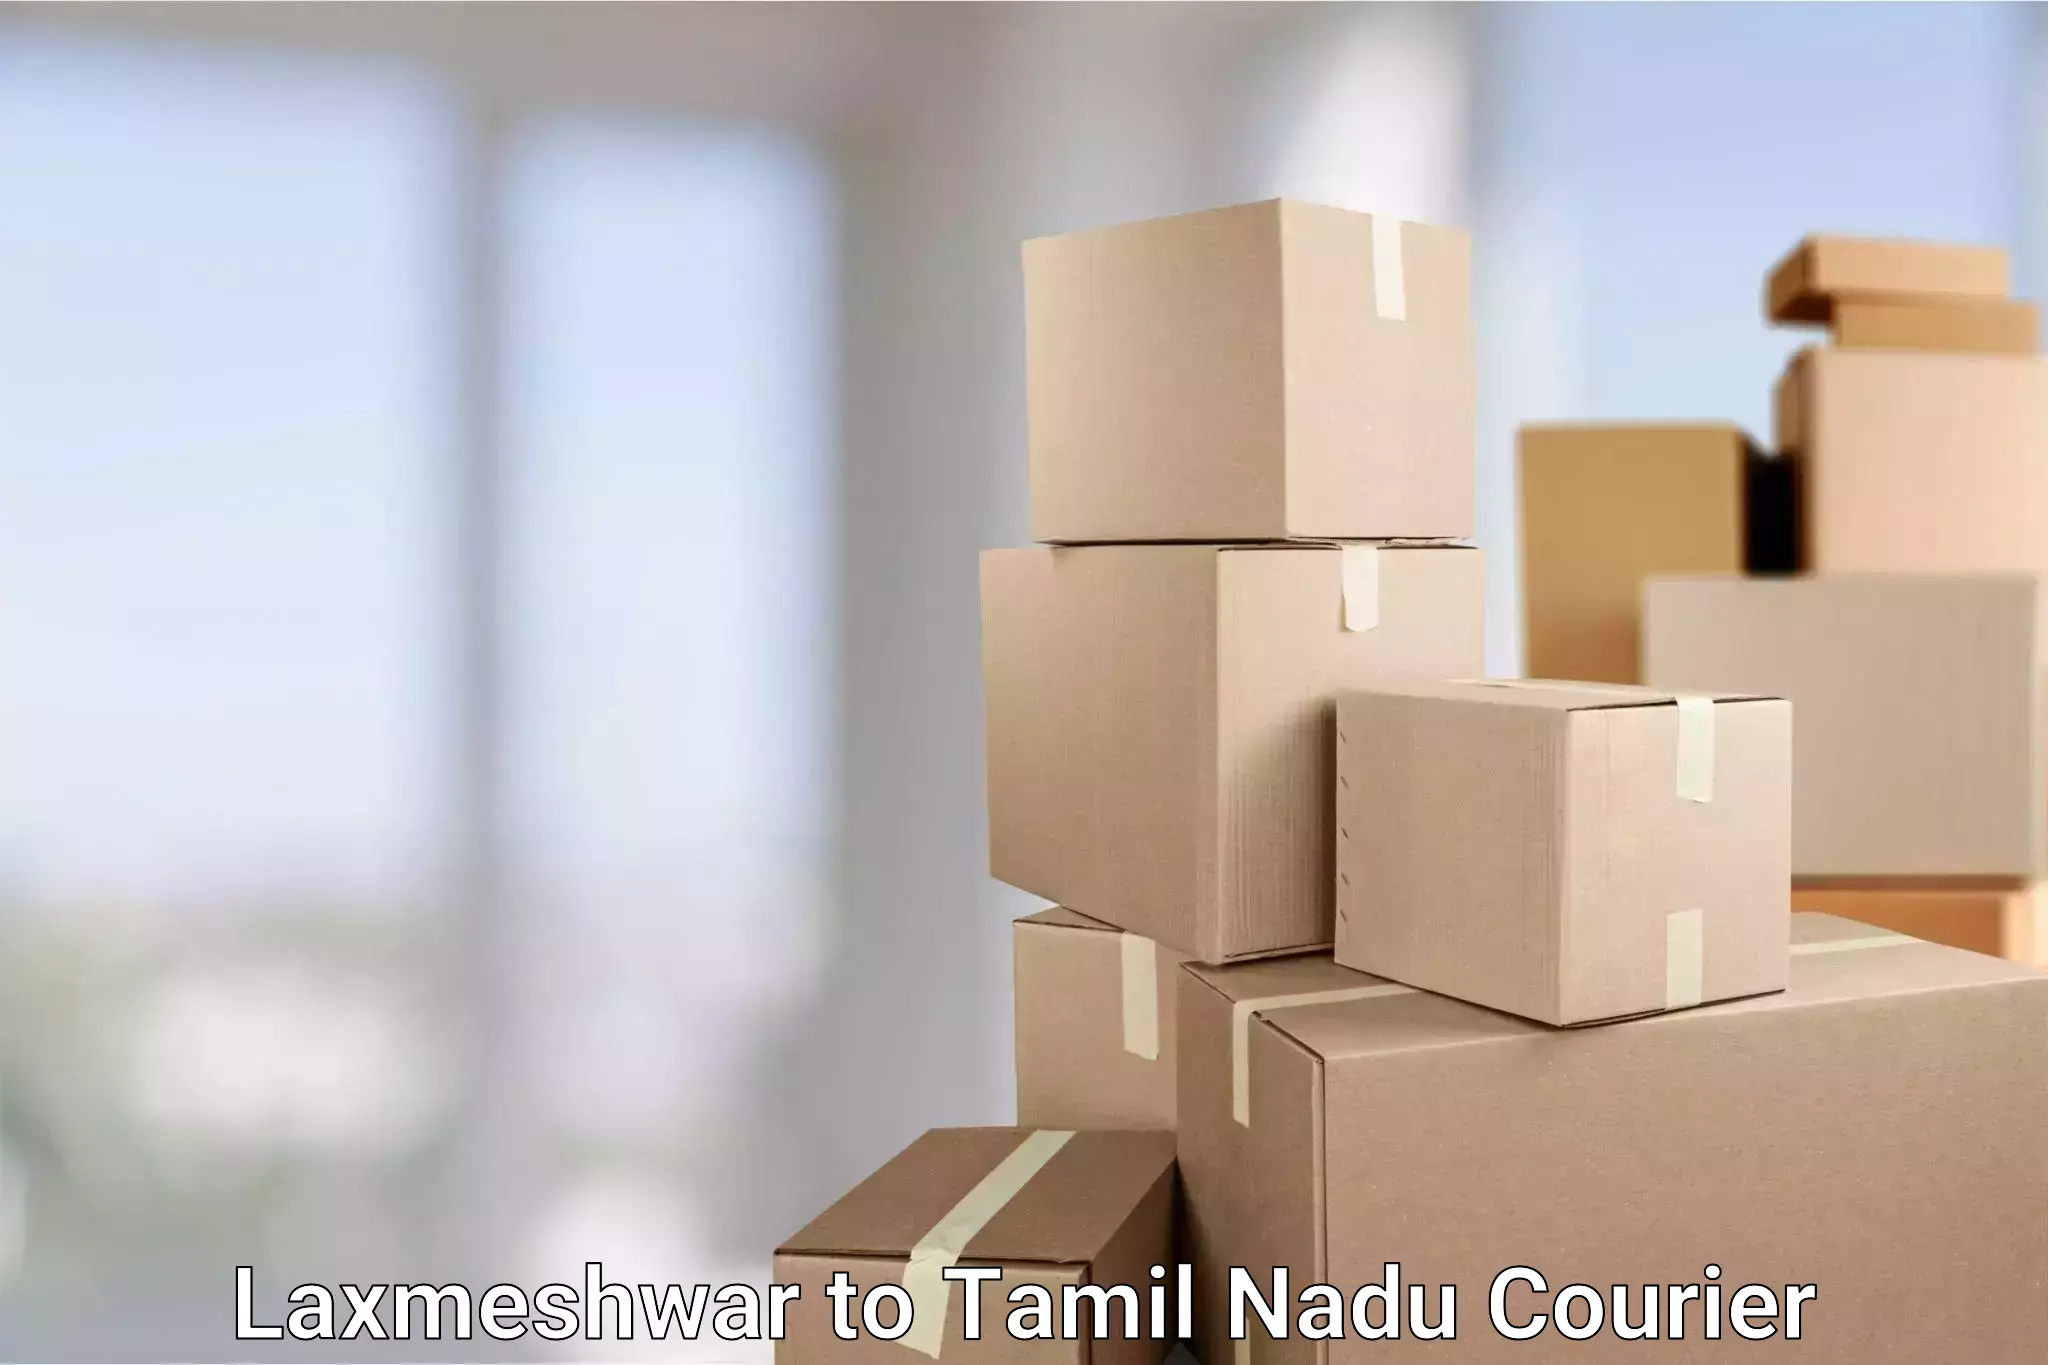 Fast shipping solutions Laxmeshwar to Vellore Institute of Technology